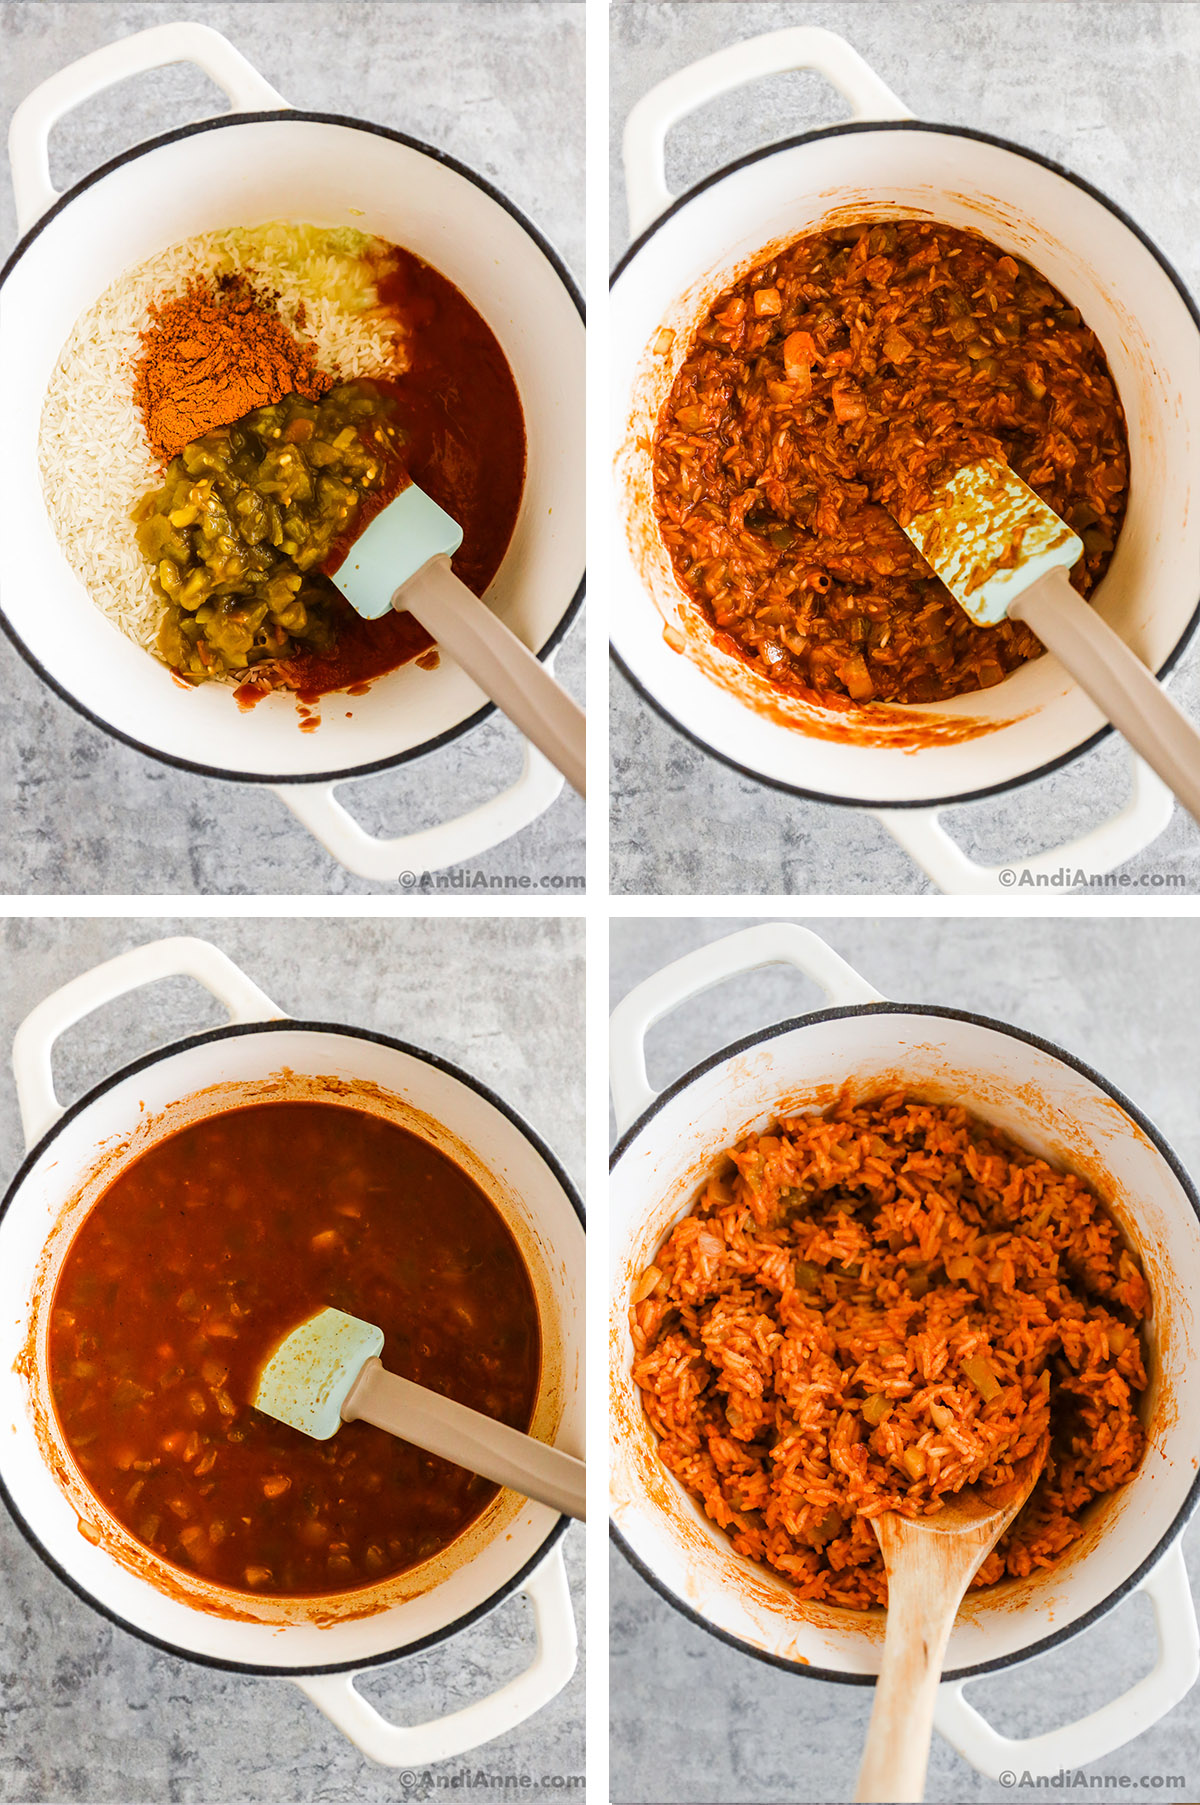 Four images of a white pot showing steps to make recipe. First is white rice, tomato sauce, green chilies, taco seasoning and onion. Second is cooked red colored rice in the pot. Tomato sauce liquid with ingredients in third image. Fourth is cooked taco rice with green chilies.